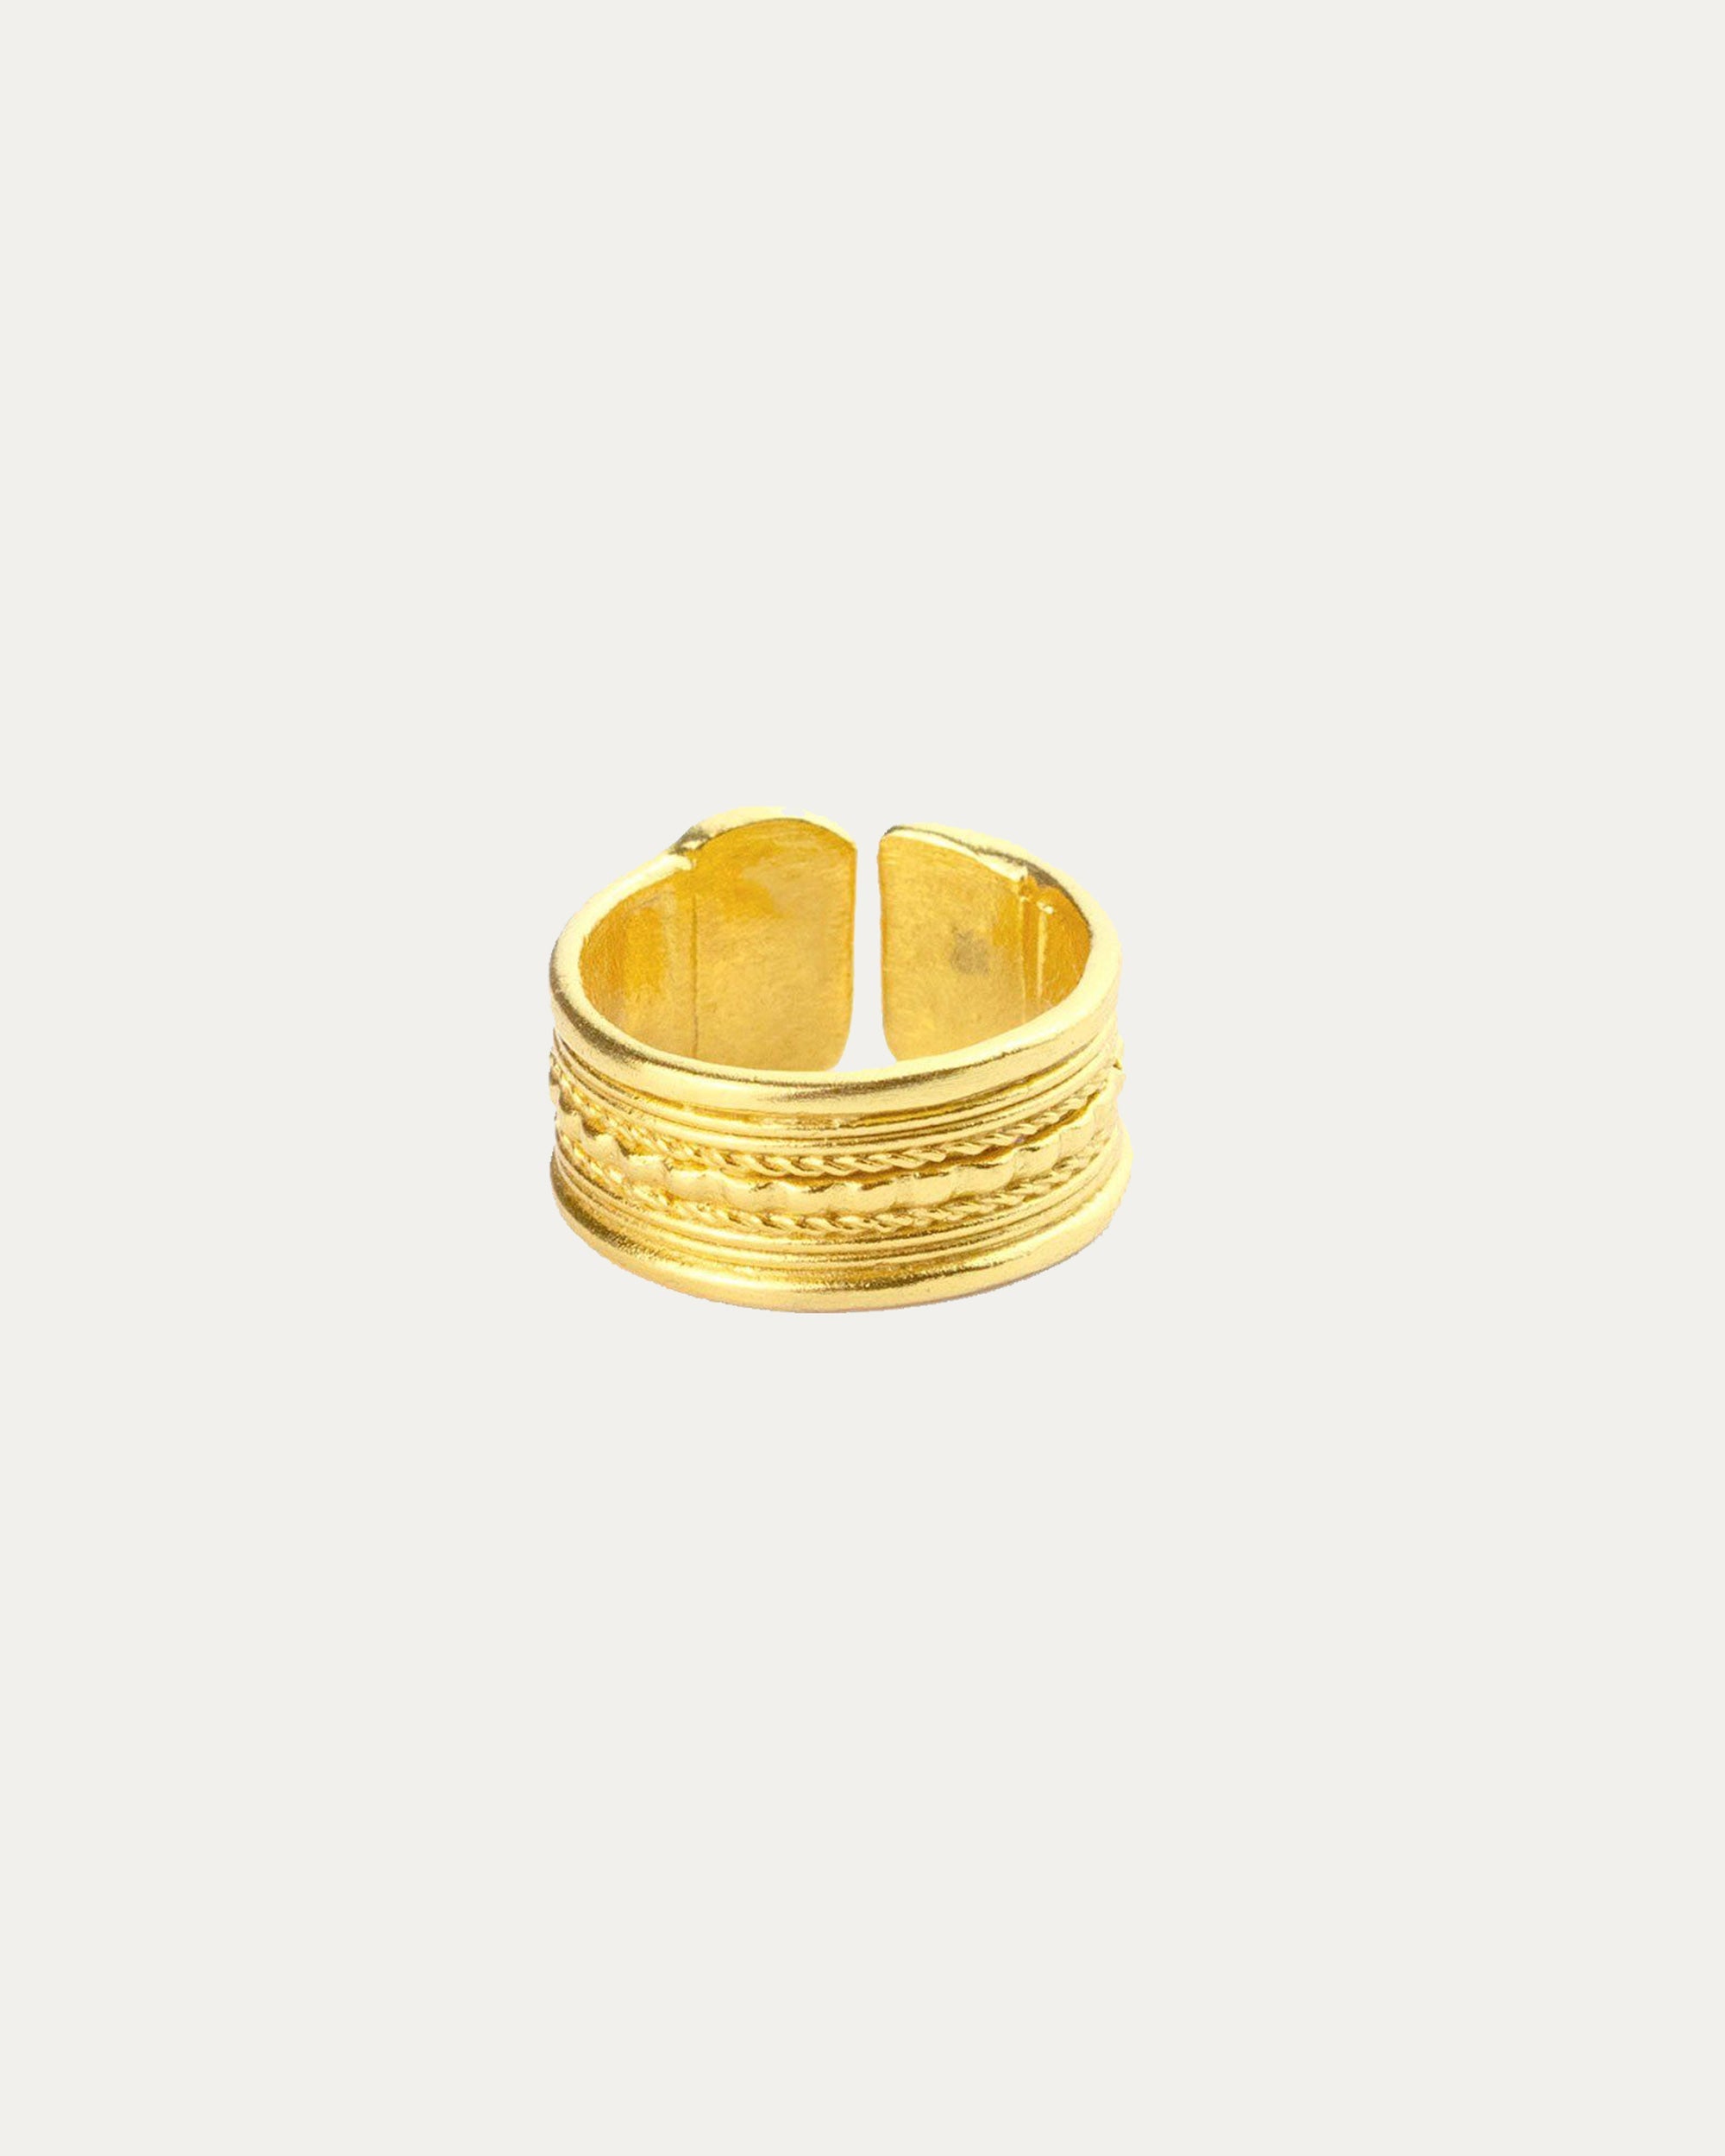 Horai Textured Stacking Ring | Sustainable Jewellery by Ottoman Hands